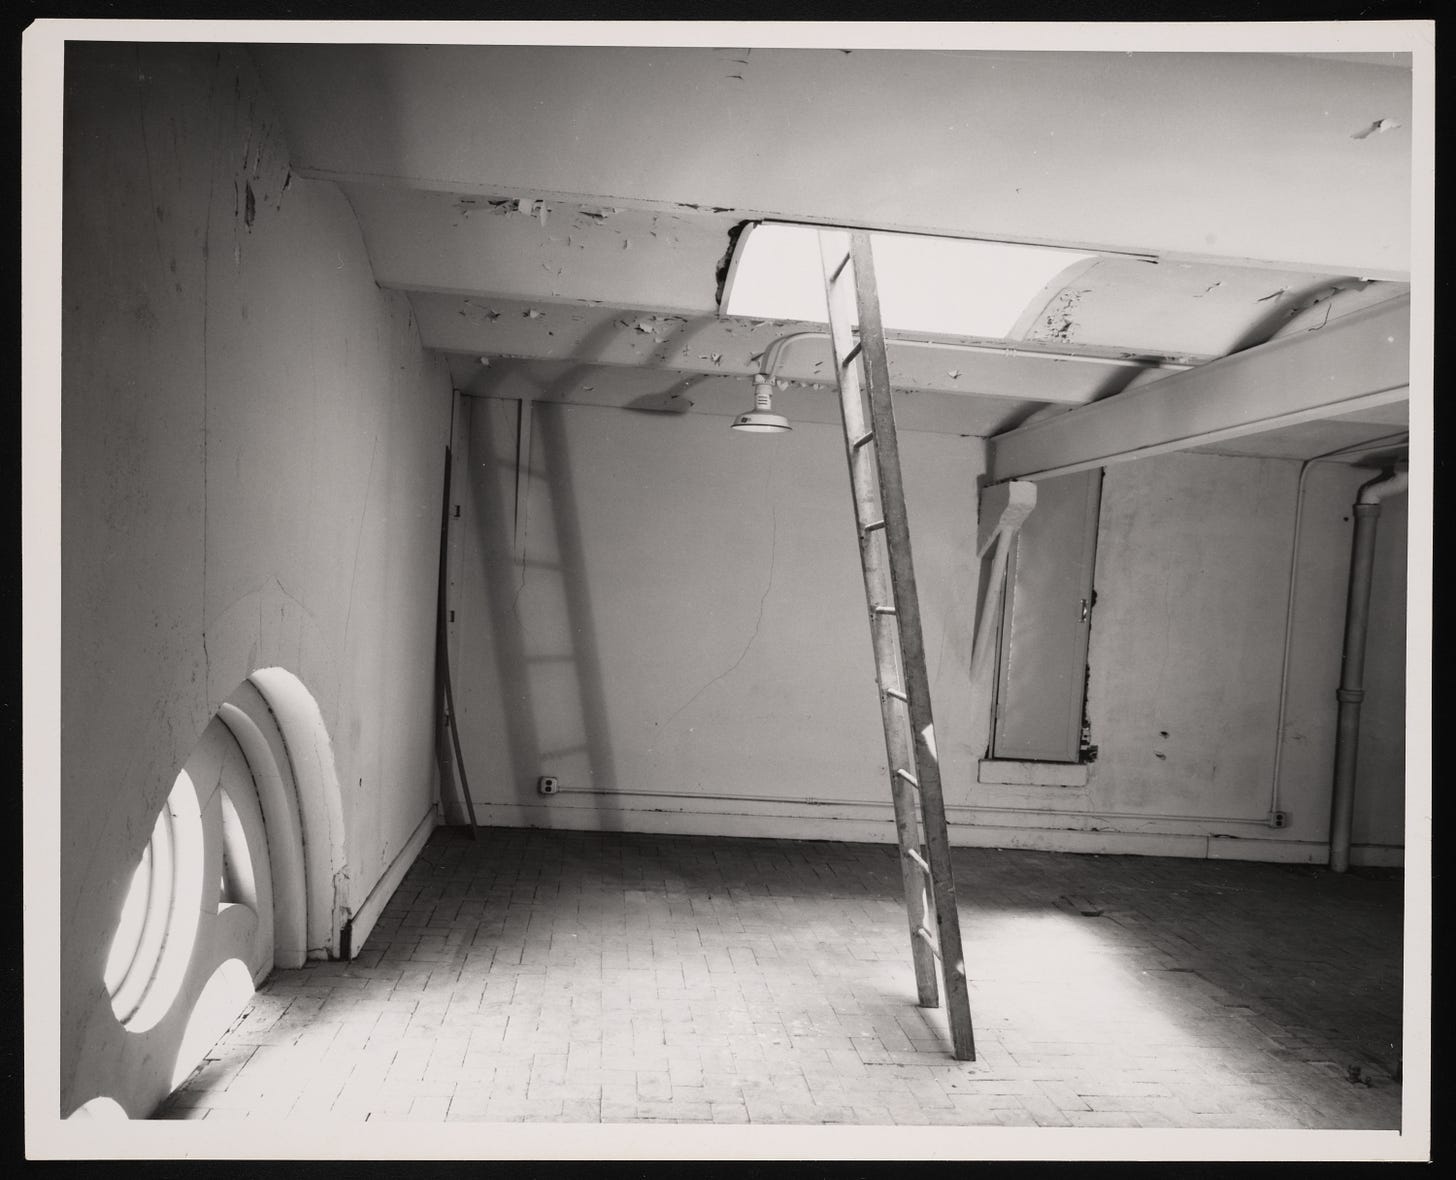 A black and white photograph of a low-ceilinged room where there are two sources of light. One is in the bottom left of the photo, where daylight streams through the top half of a trefoil window. The second is a hatch in the ceiling. Reaching up through the hatch is a wooden ladder, the top of which seems to rest against nothing.